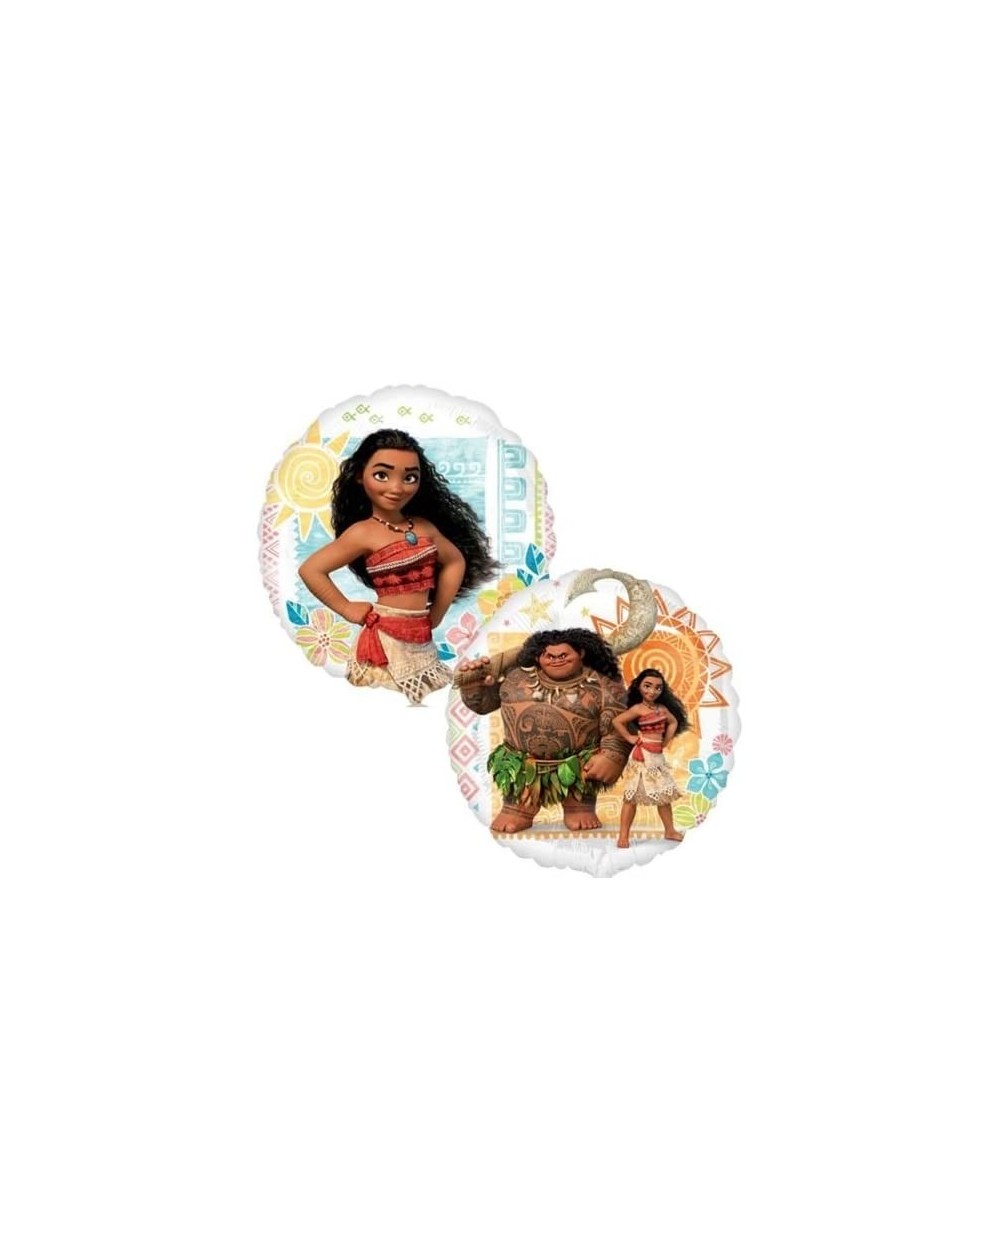 Balloons (2) Moana 18" Baby Shower Birthday Party Supplies Foil Mylar Helium Balloons Decorations Movie Double Sided - CC12O4...